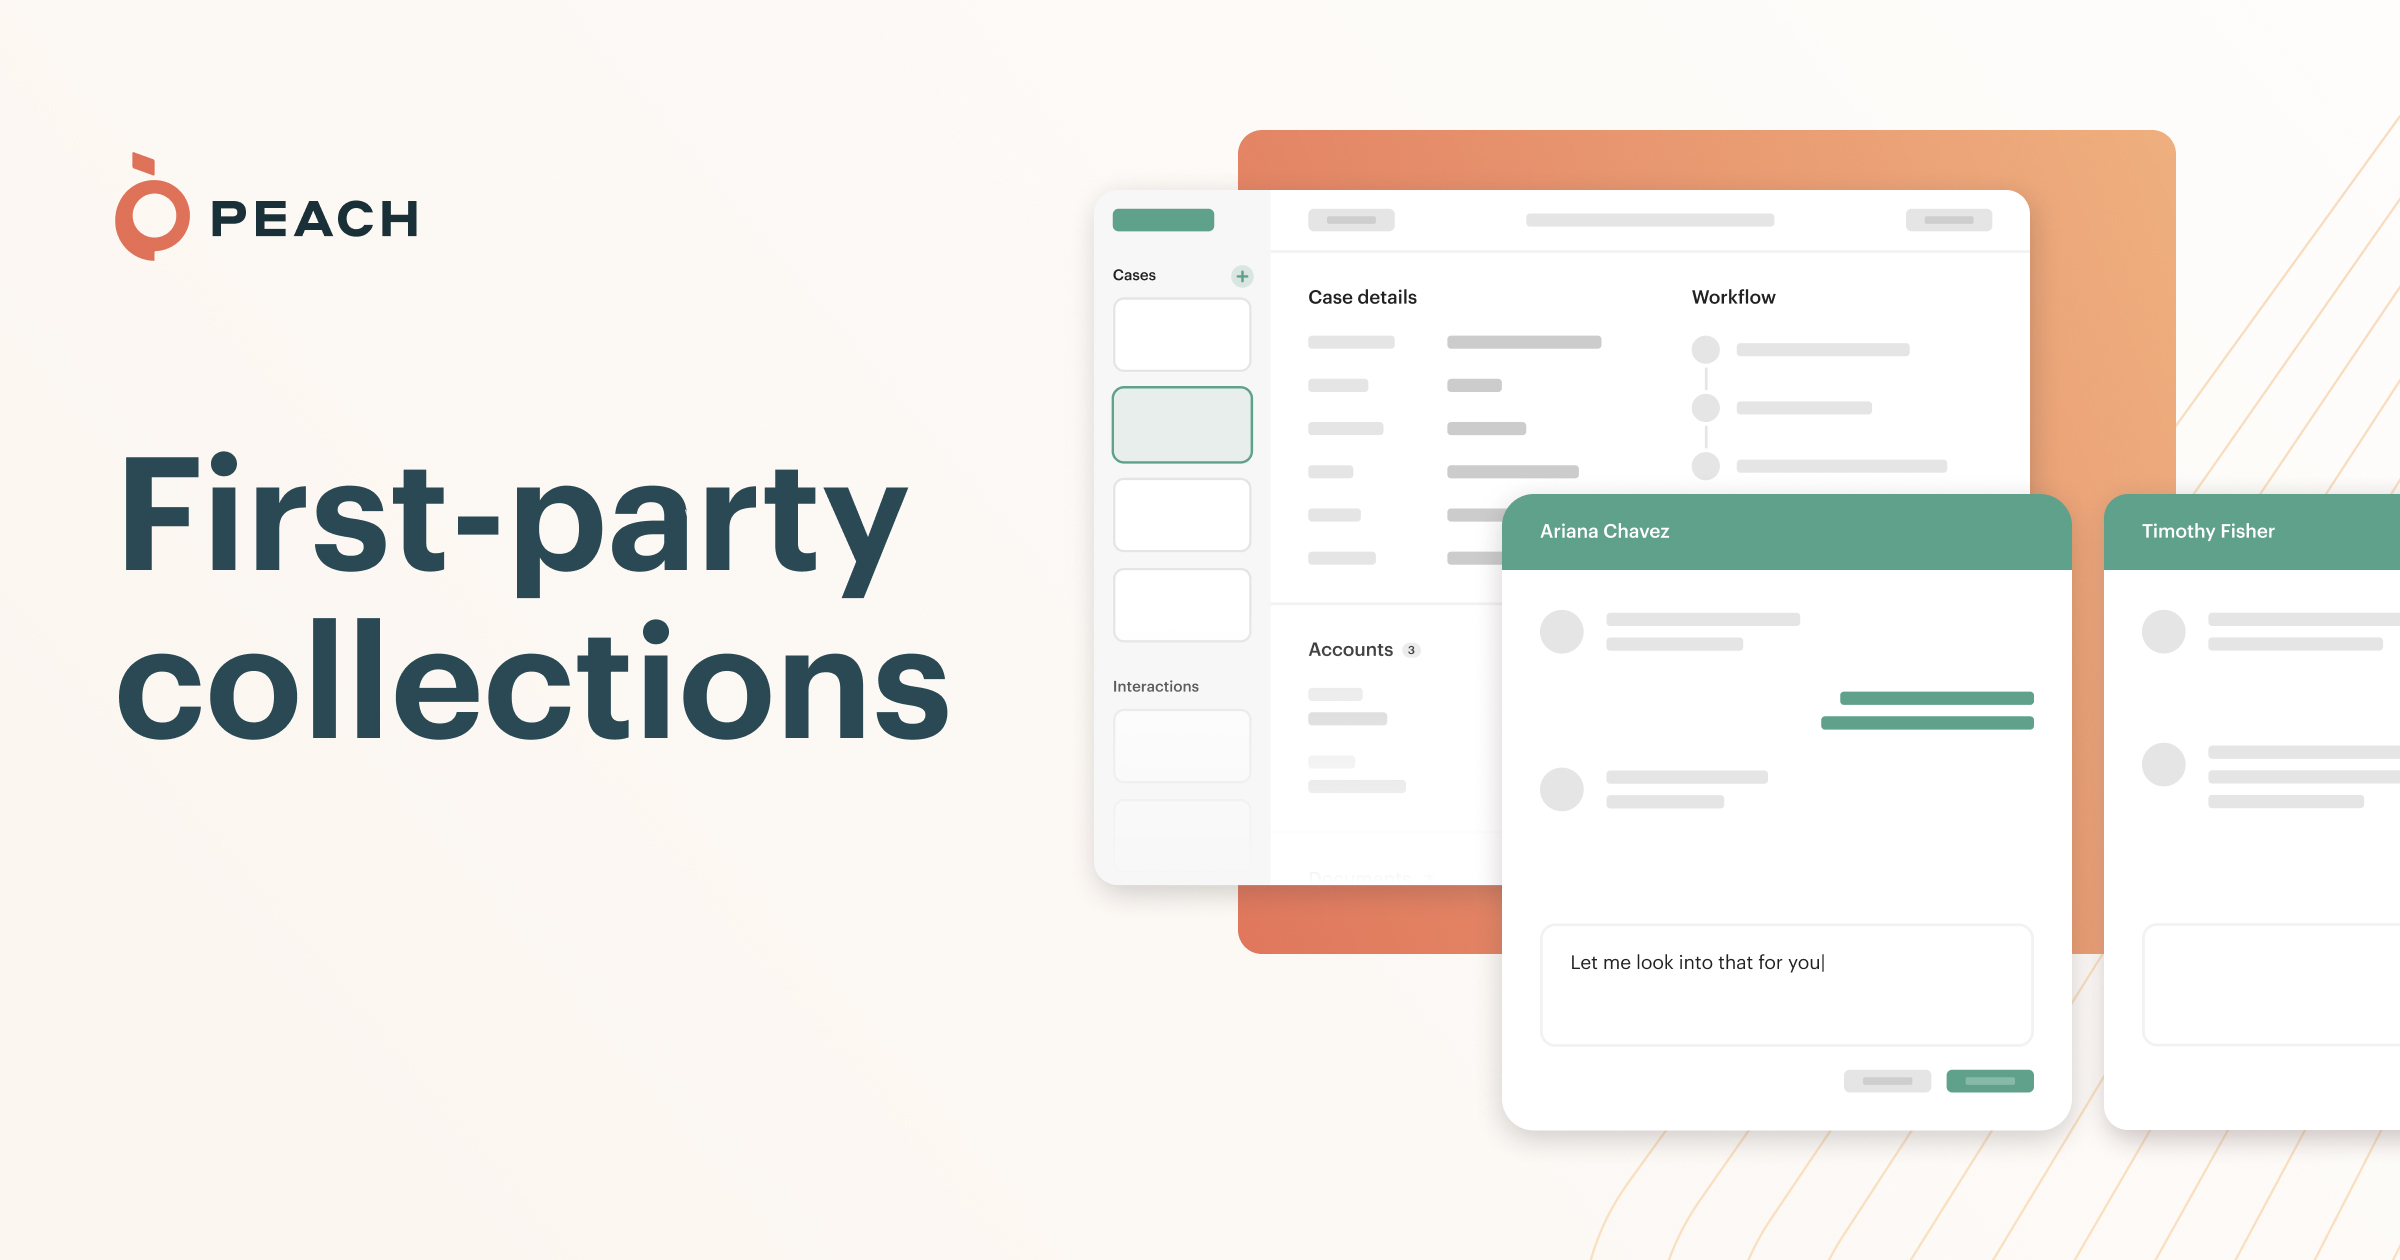 How first-party collections works in Peach's loan servicing platform